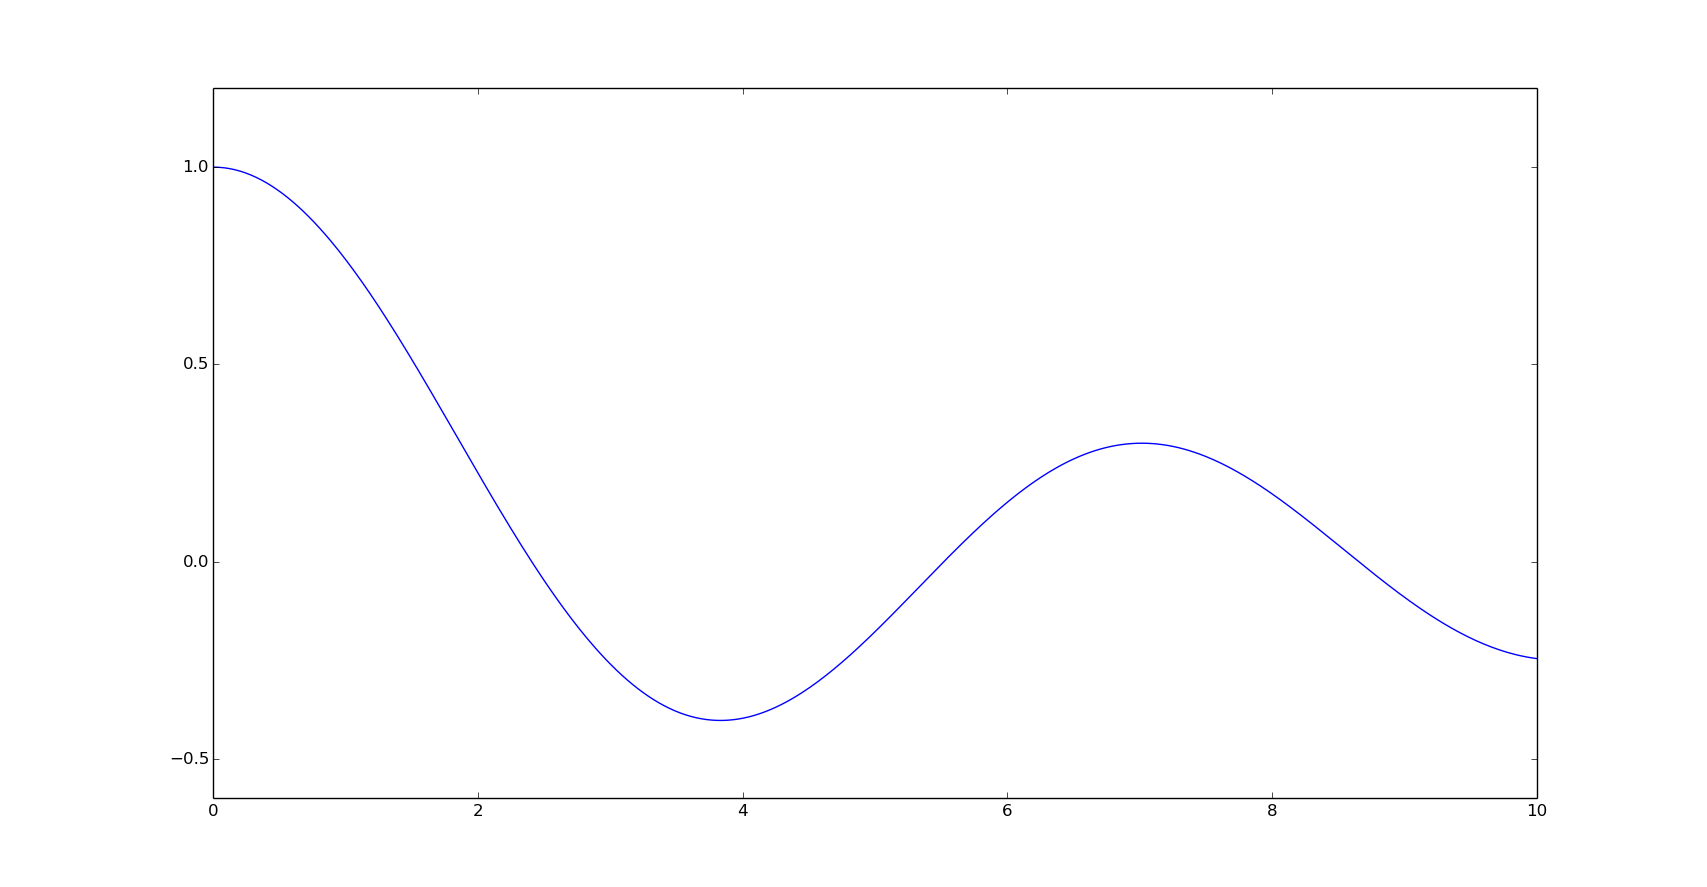 Bessel function of the first kind of order 0